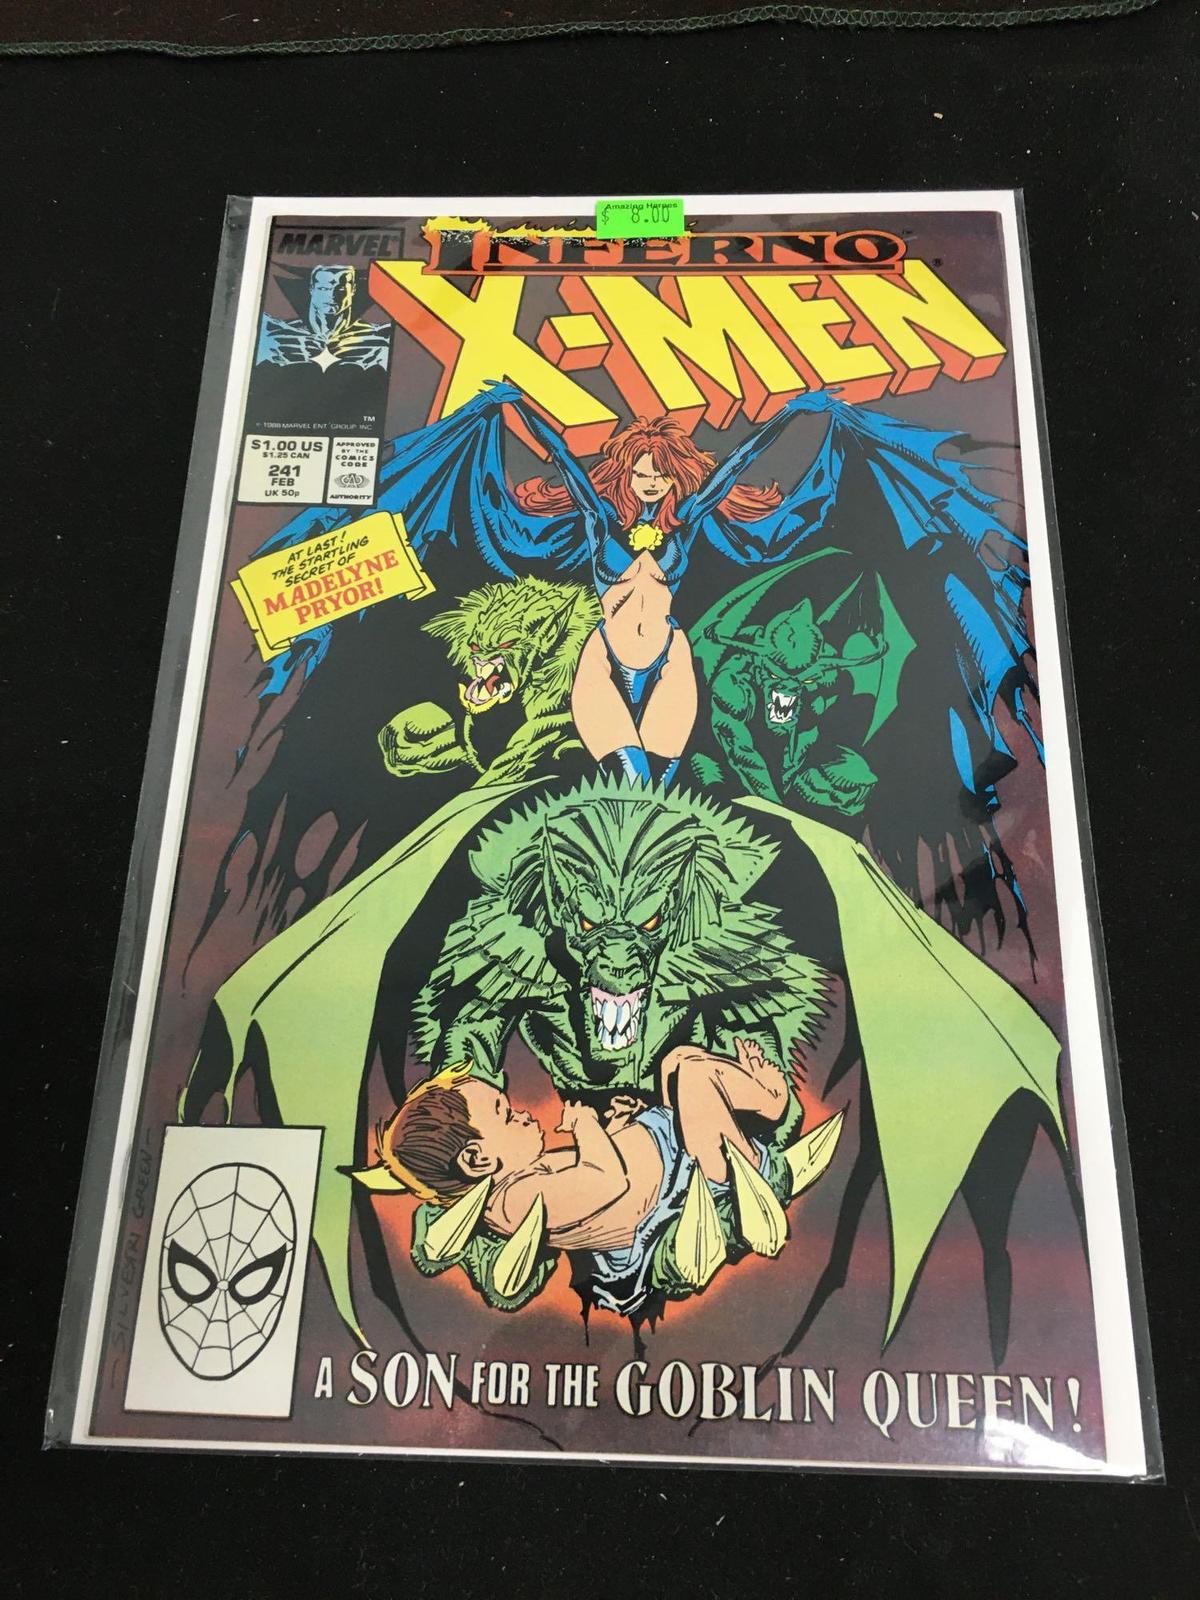 The Uncanny X-Men #241 Comic Book from Amazing Collection